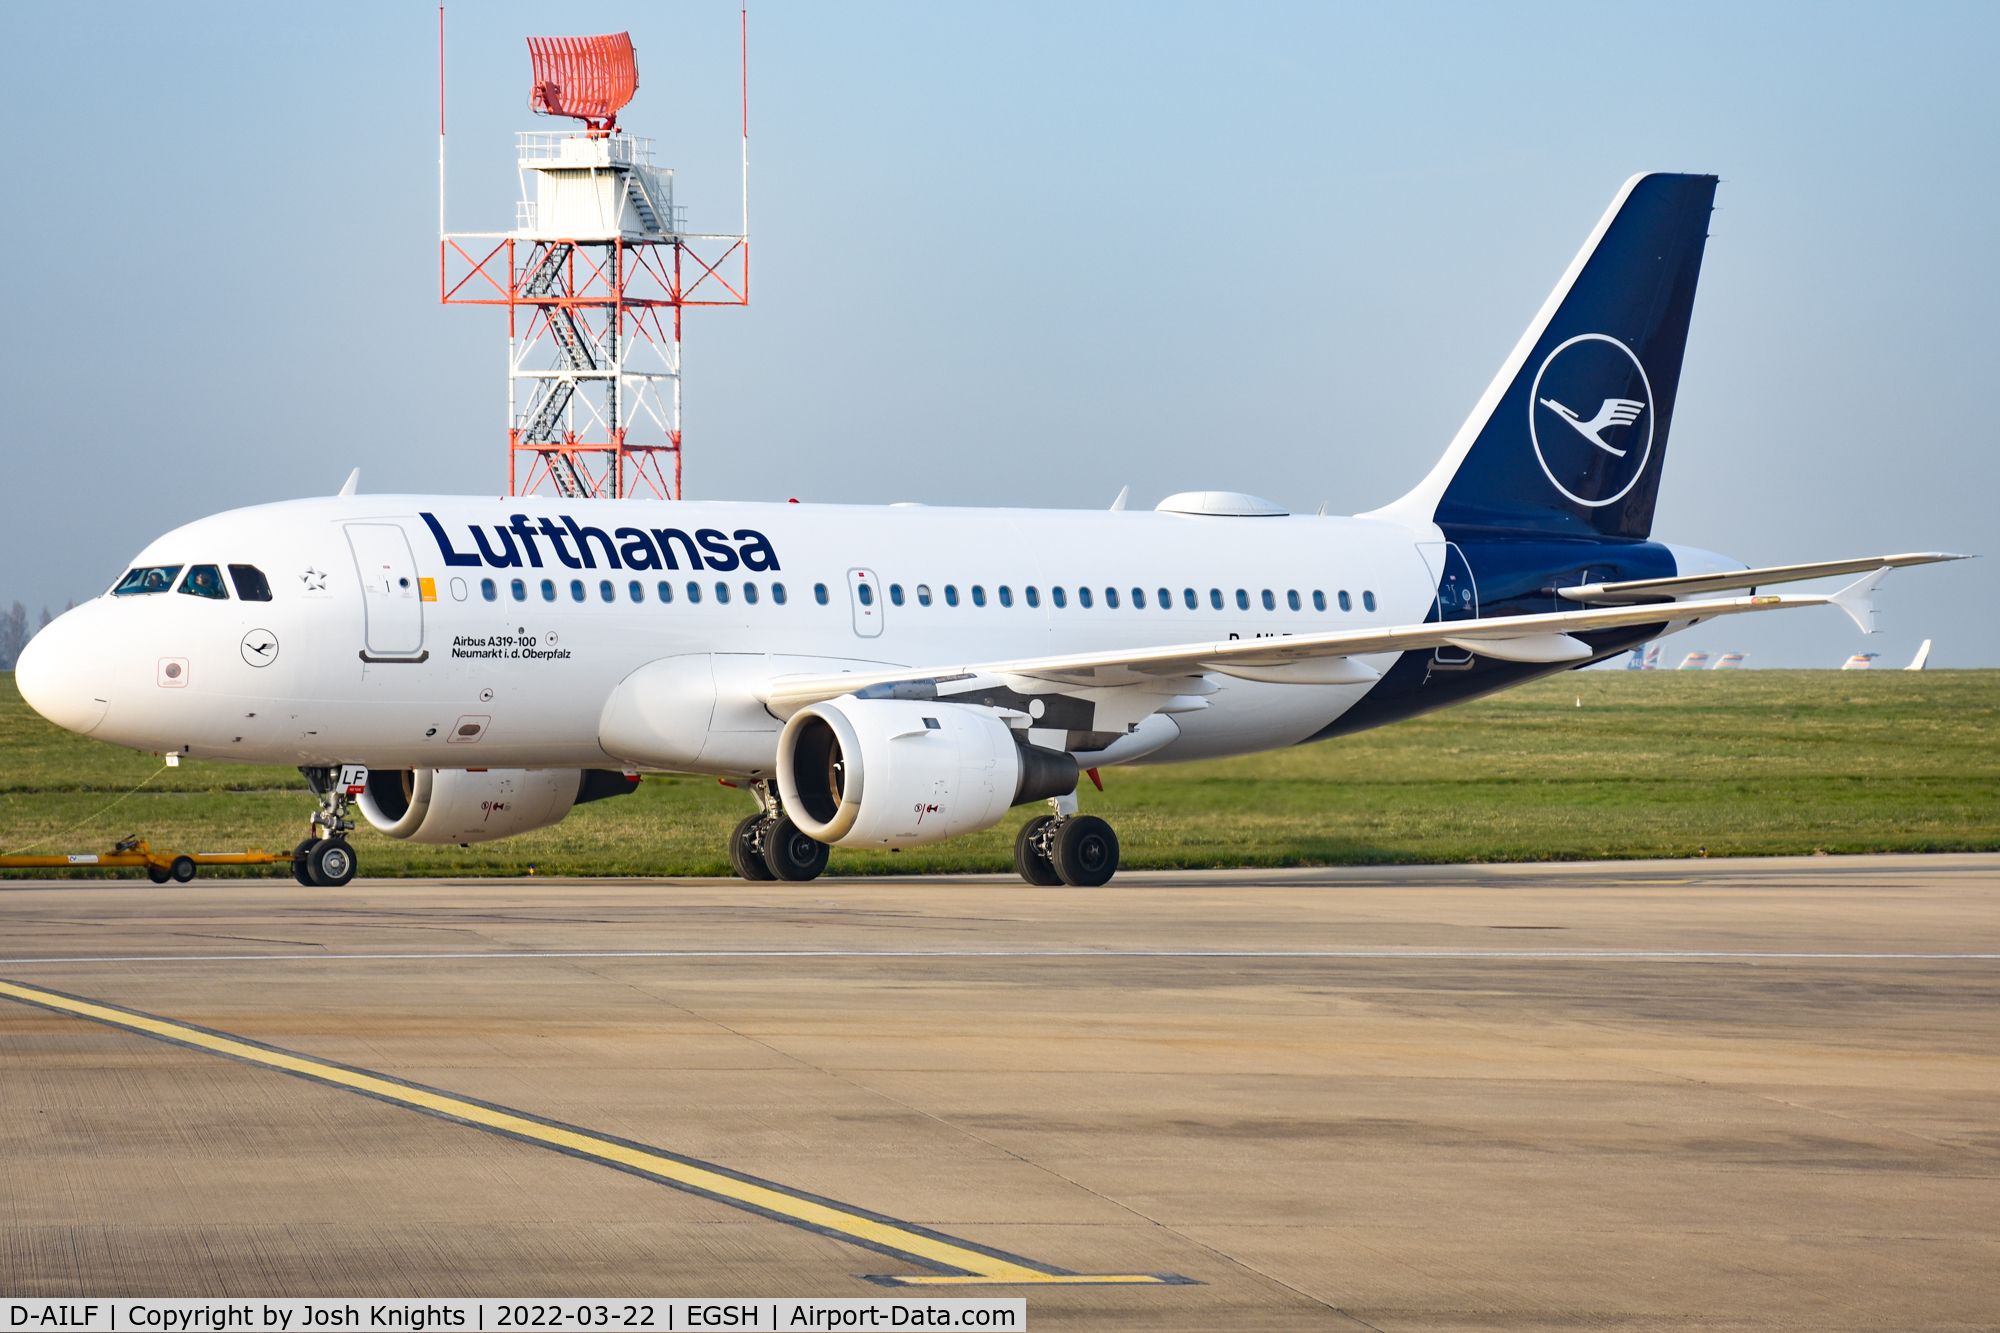 D-AILF, 1996 Airbus A319-114 C/N 636, Departing In The Updated Lufthansa Livery.